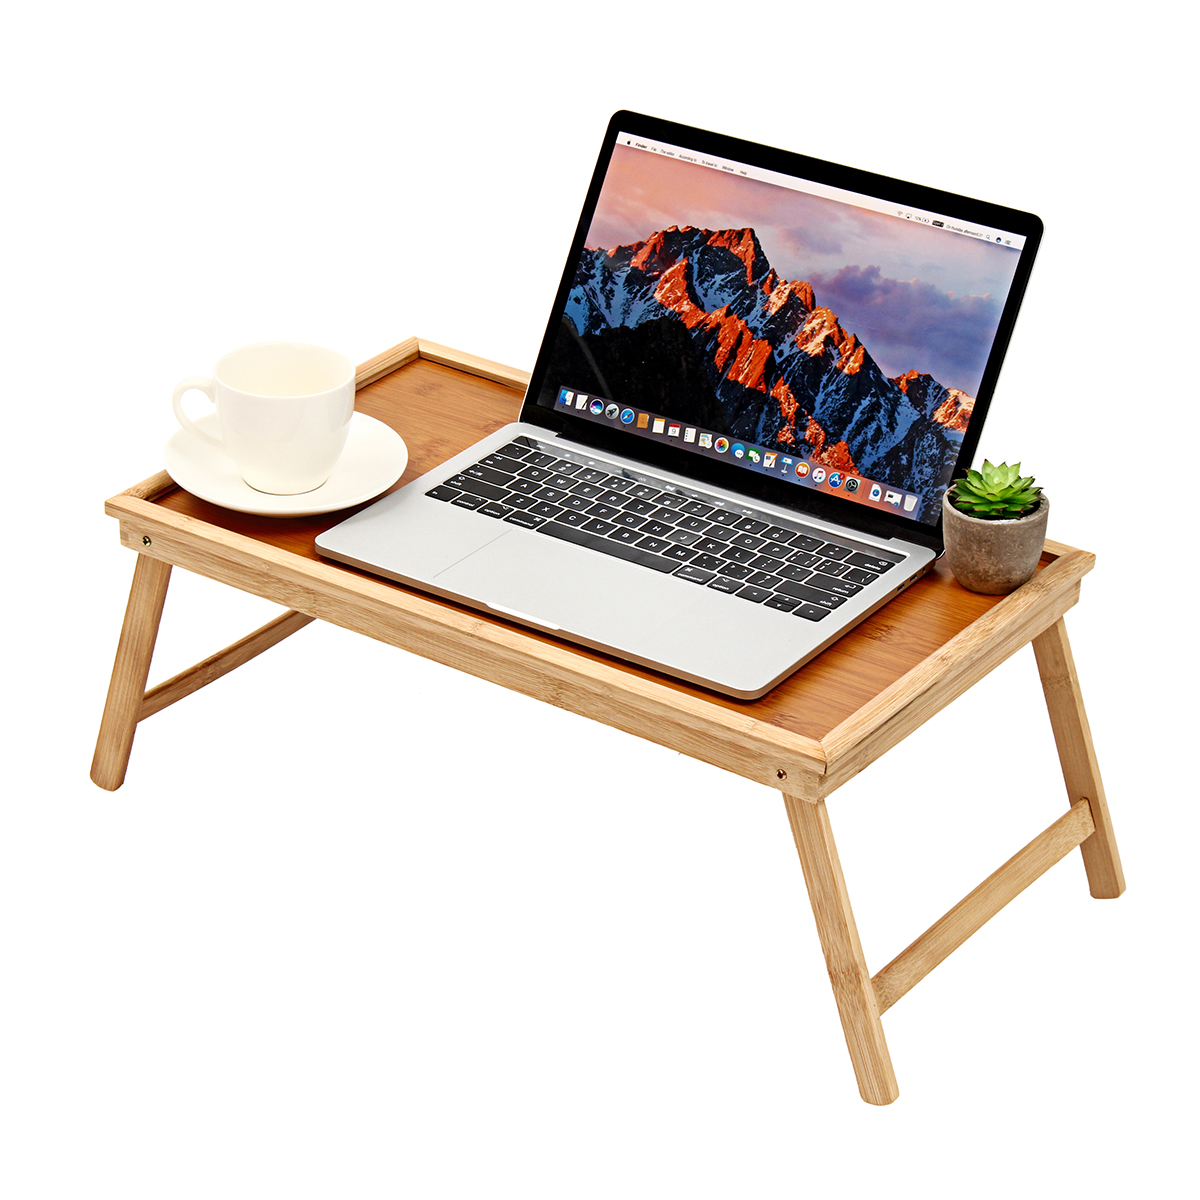 

Bamboo Wooden Table Bed Tray With Folding Legs Serving Breakfast Lap Tray